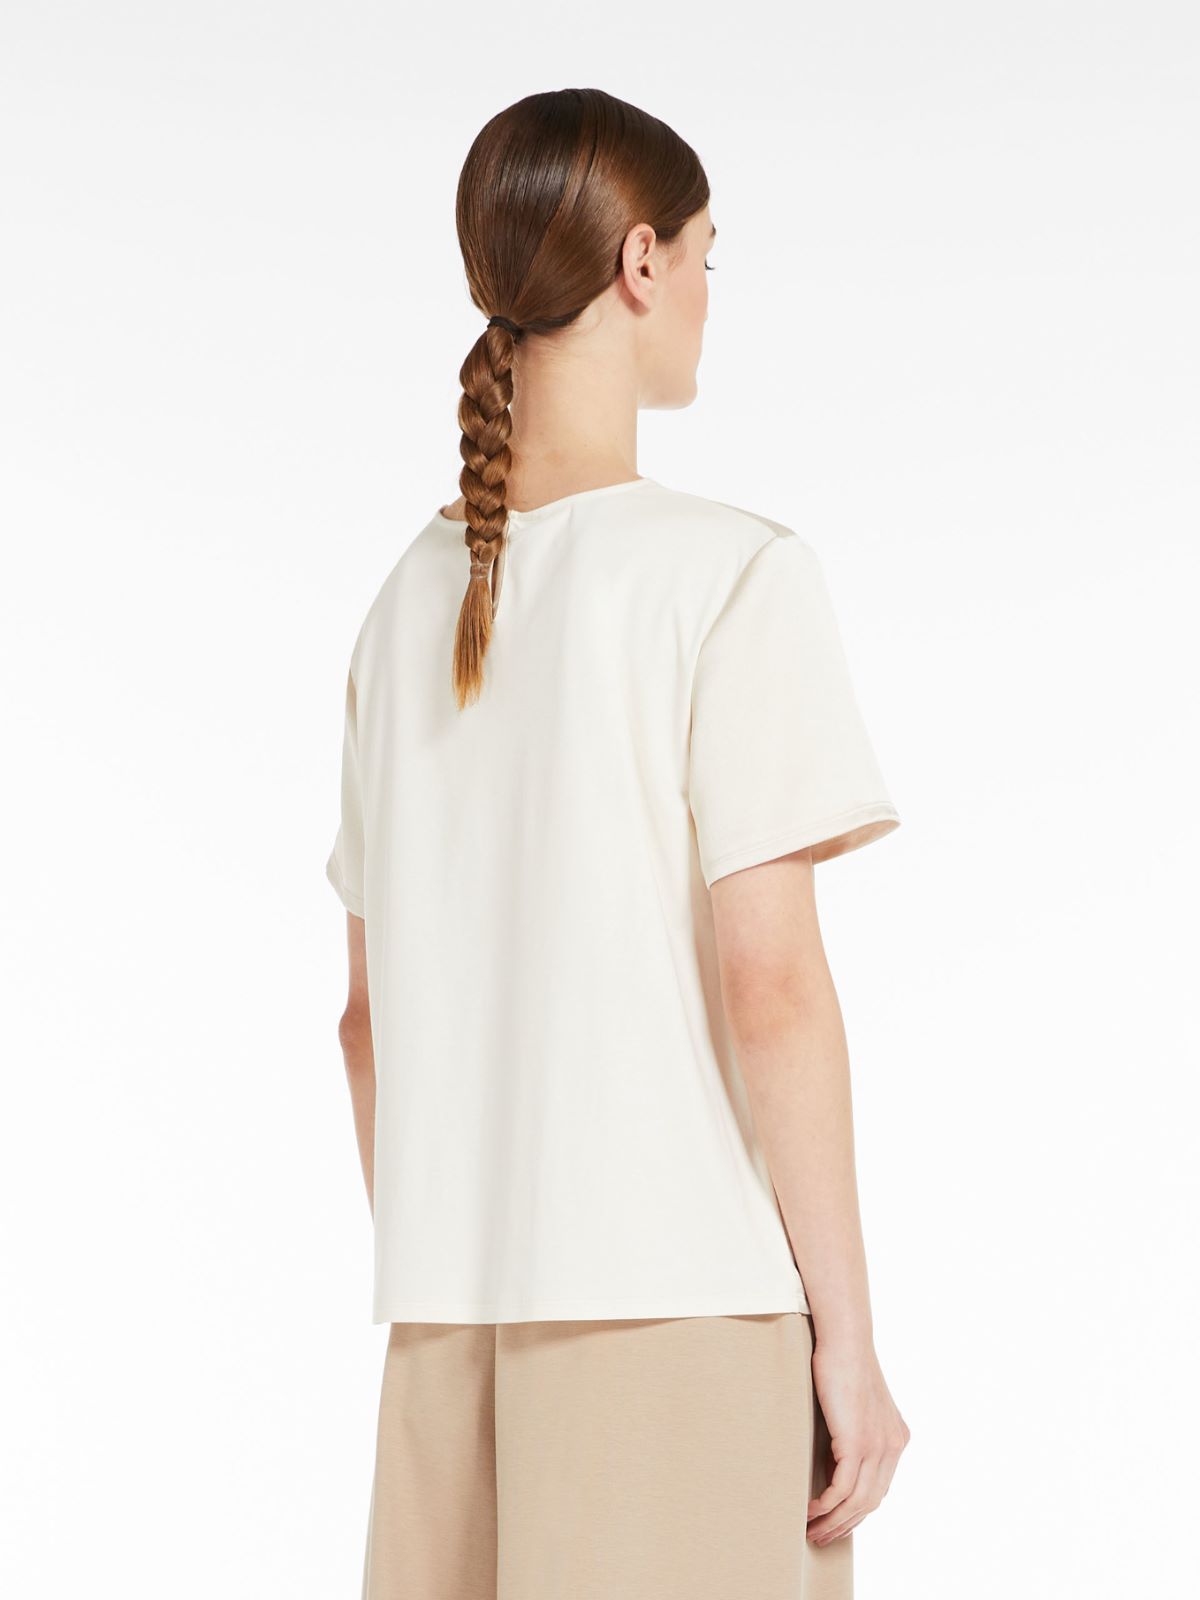 Blouse in satin and jersey - IVORY - Weekend Max Mara - 3